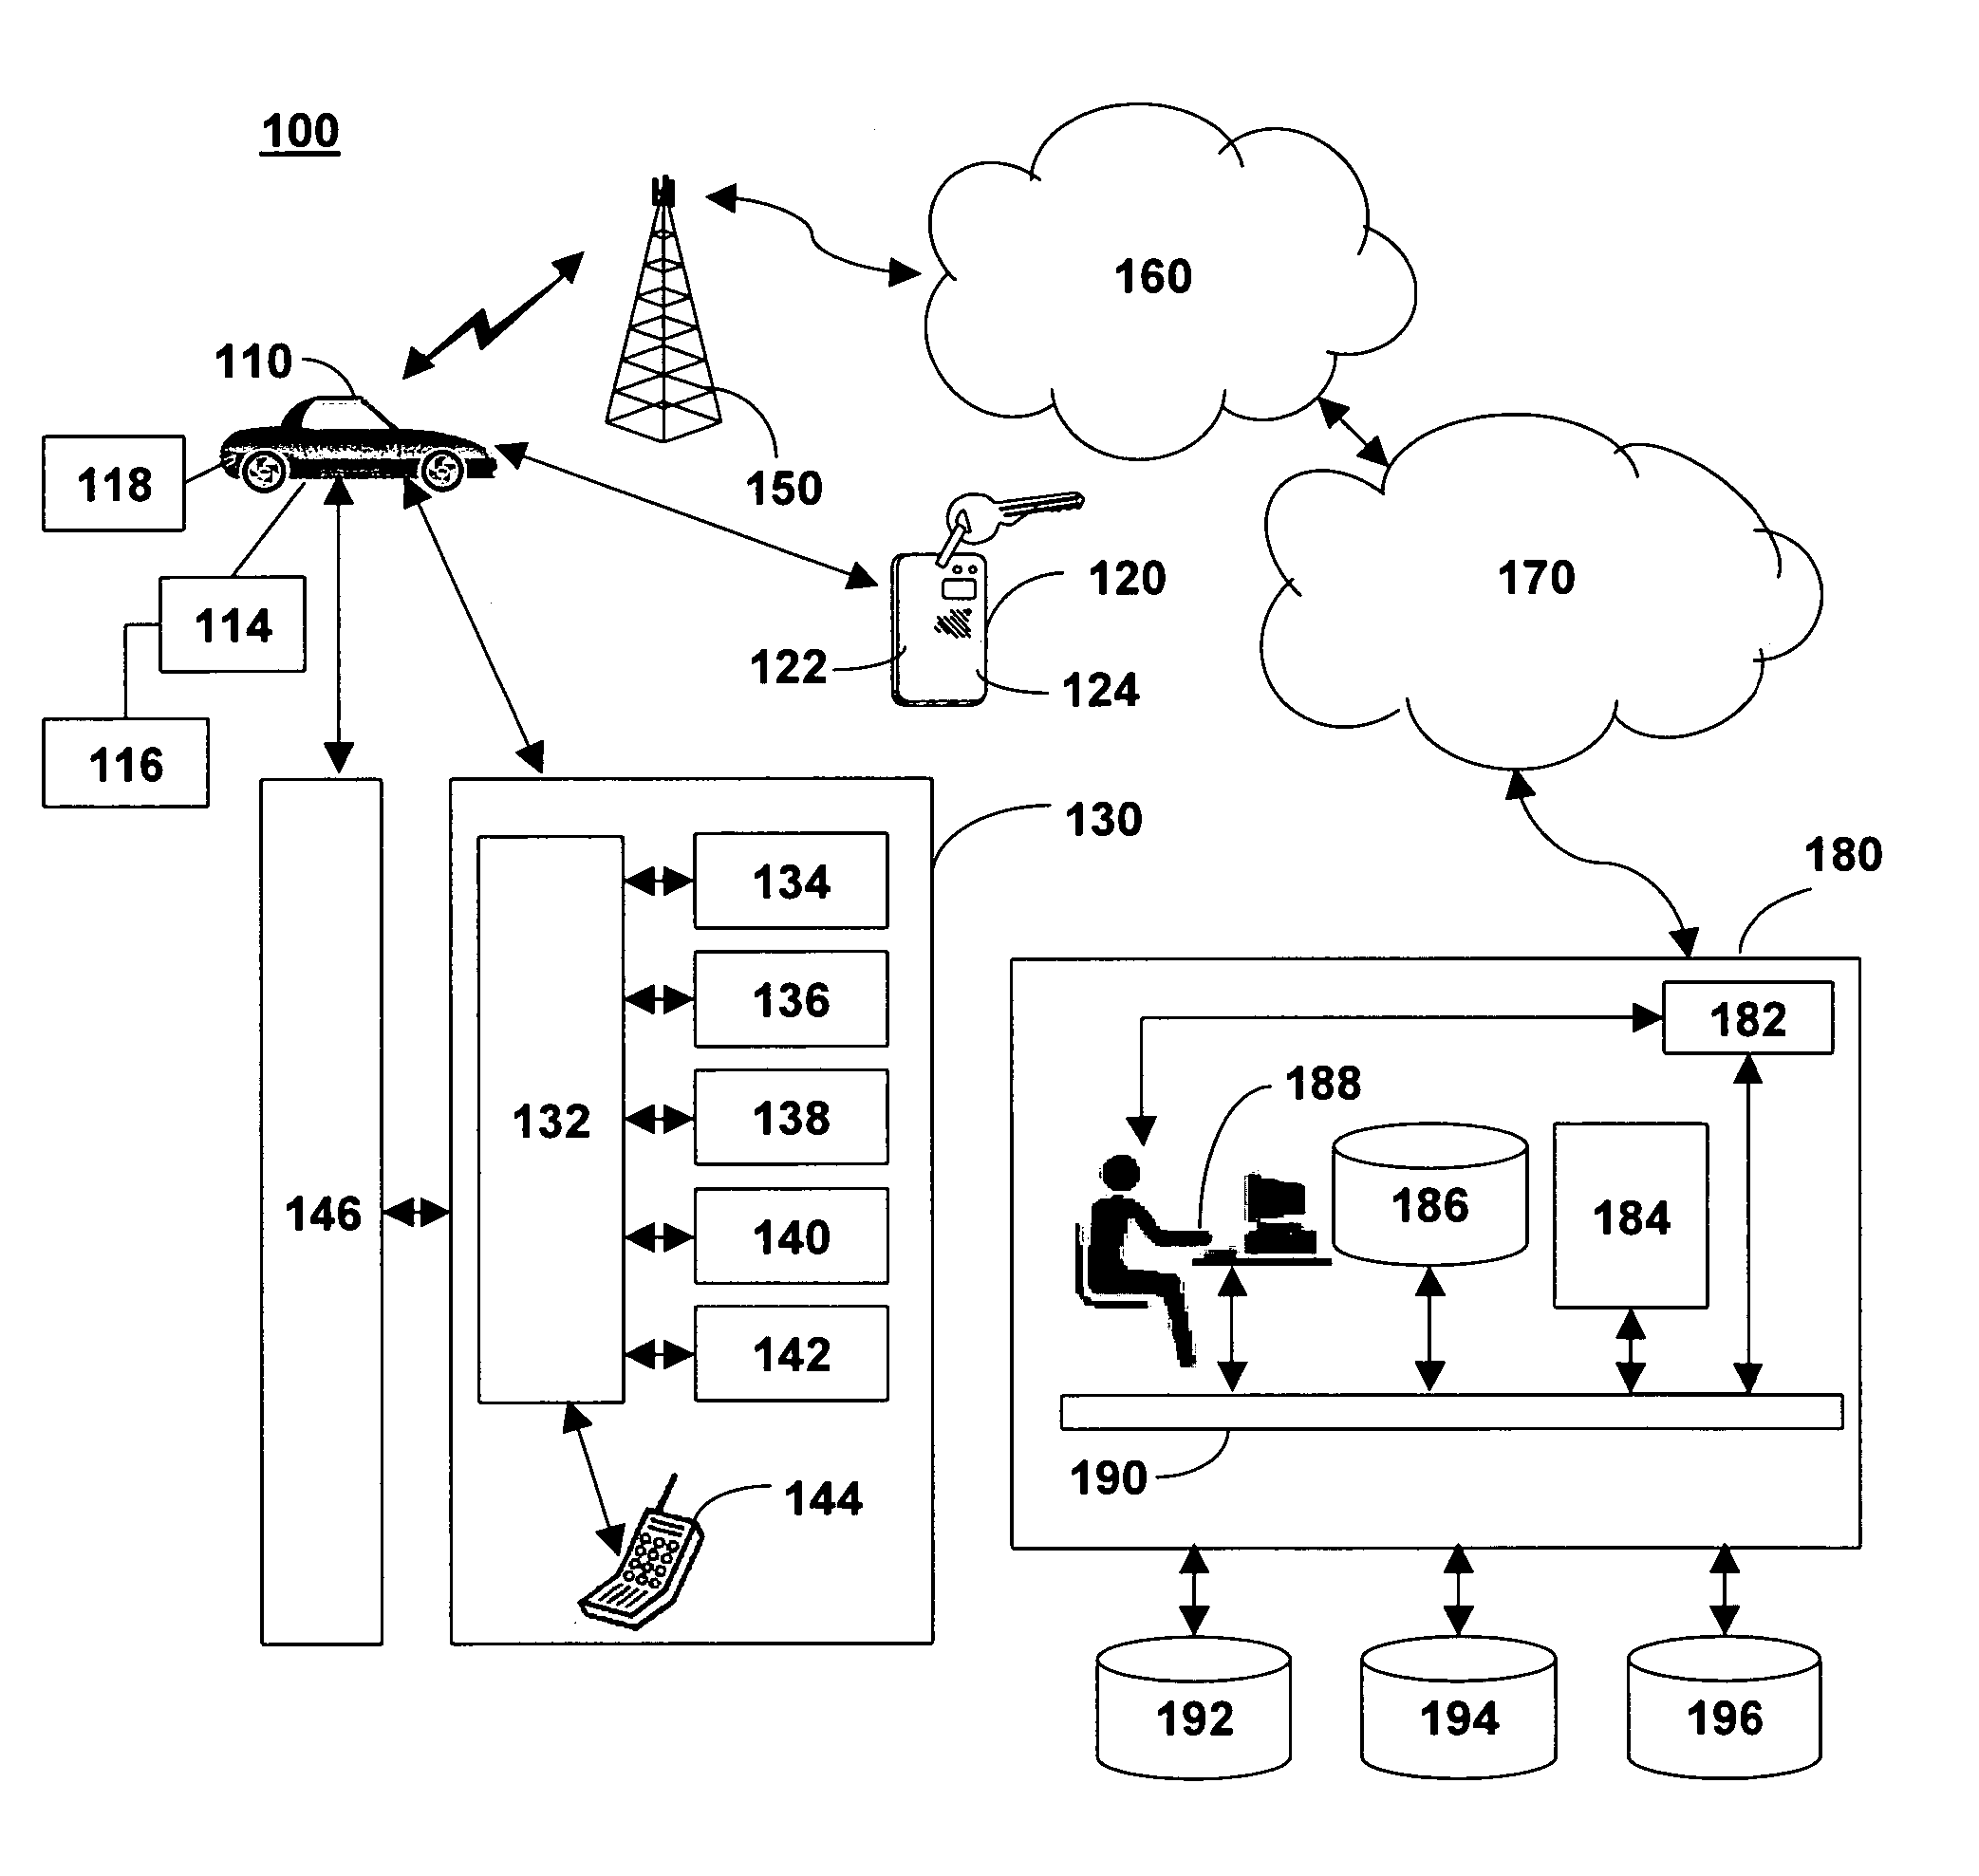 System and method for maintaining and providing personal information in real time